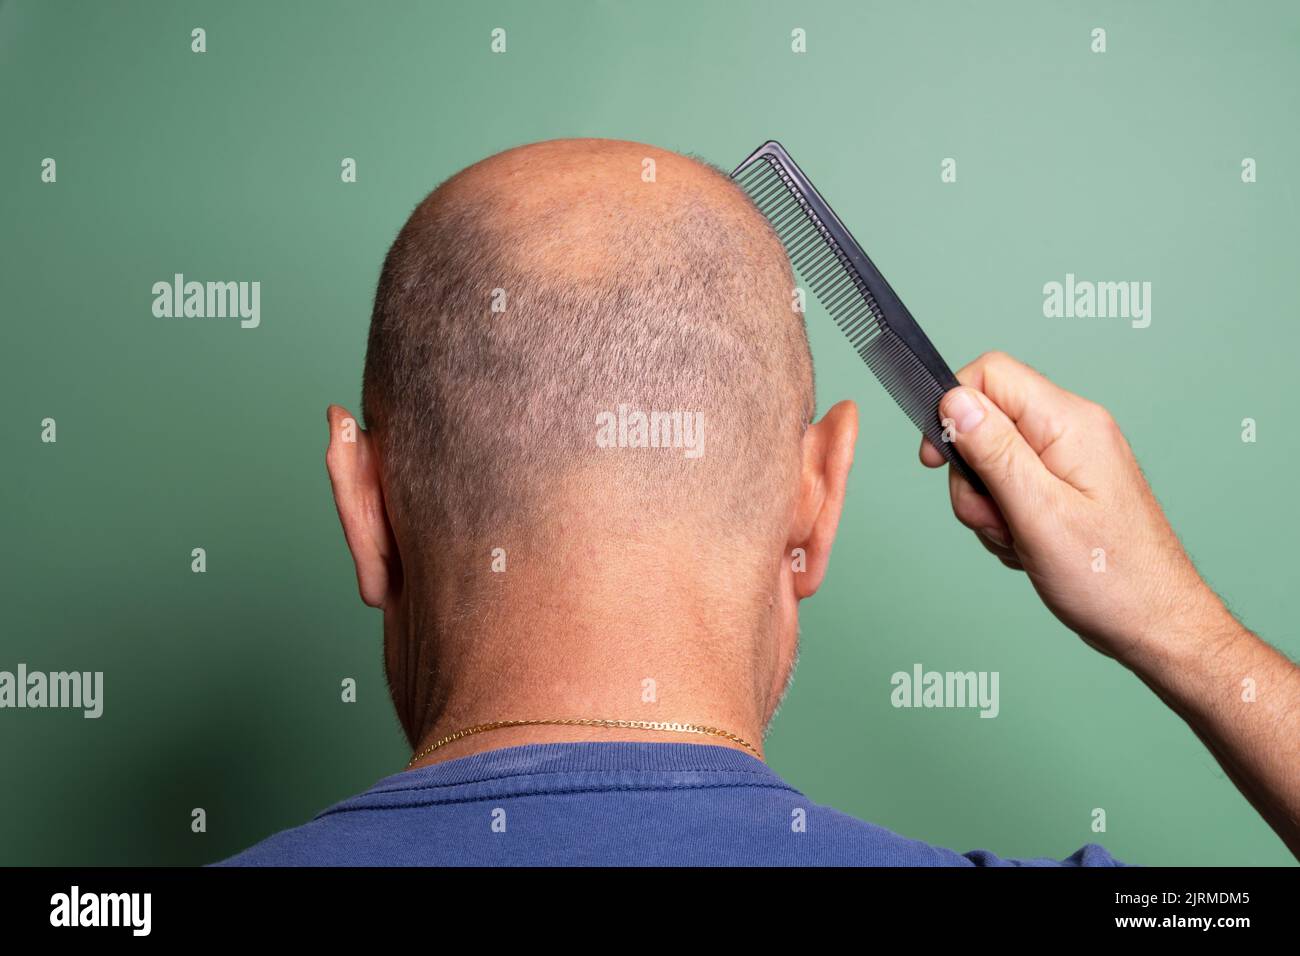 view from behind of a bald man while he combs his hair Stock Photo